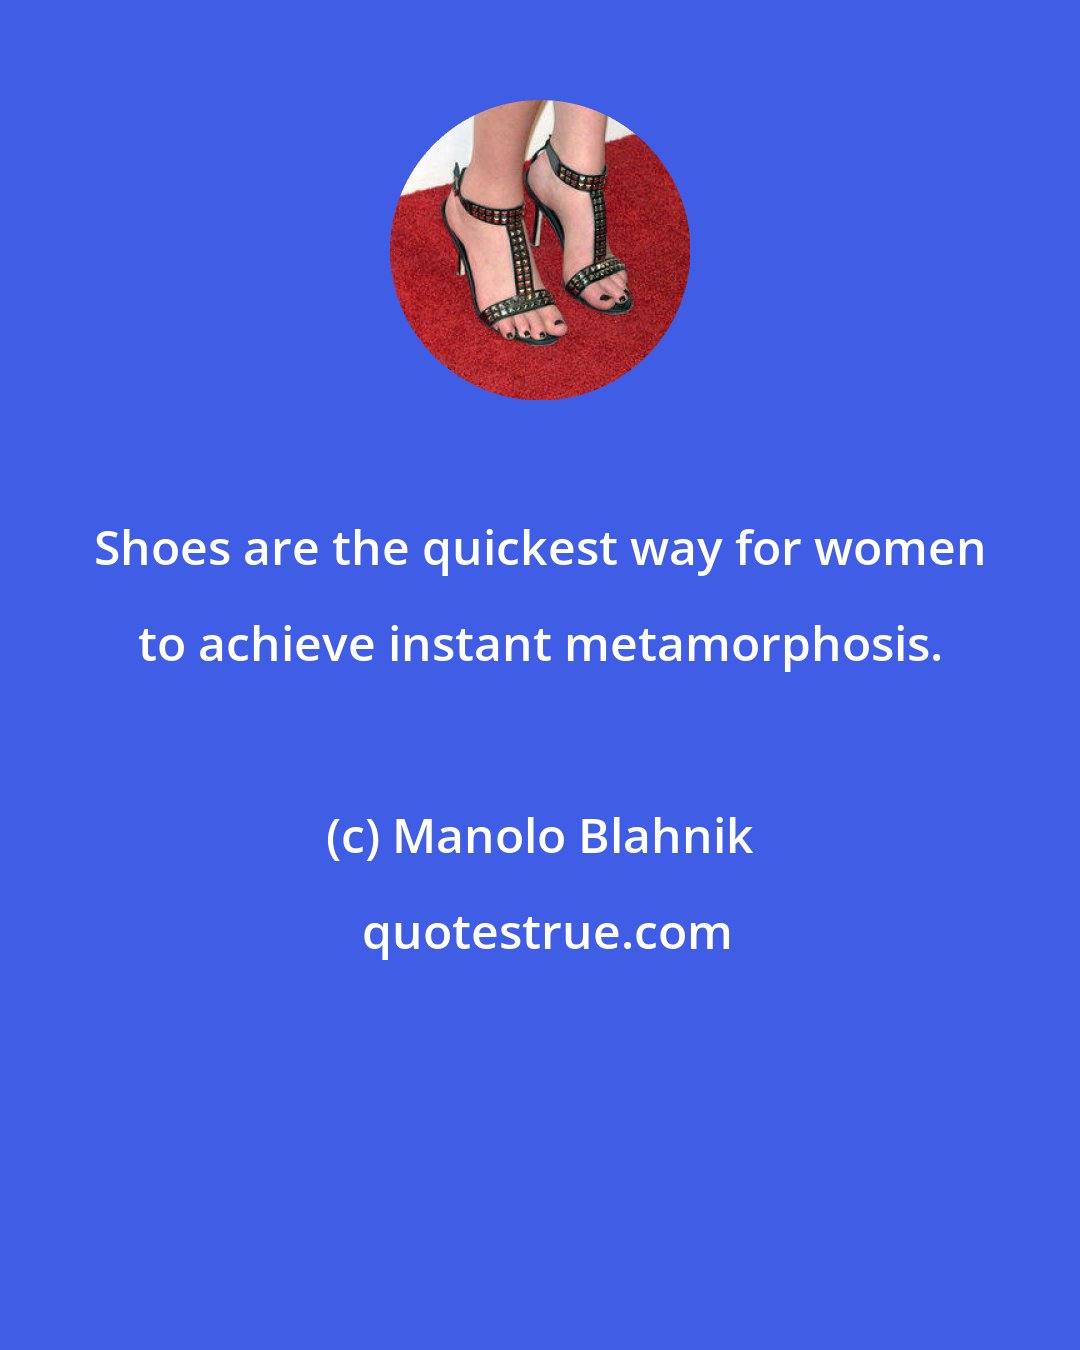 Manolo Blahnik: Shoes are the quickest way for women to achieve instant metamorphosis.